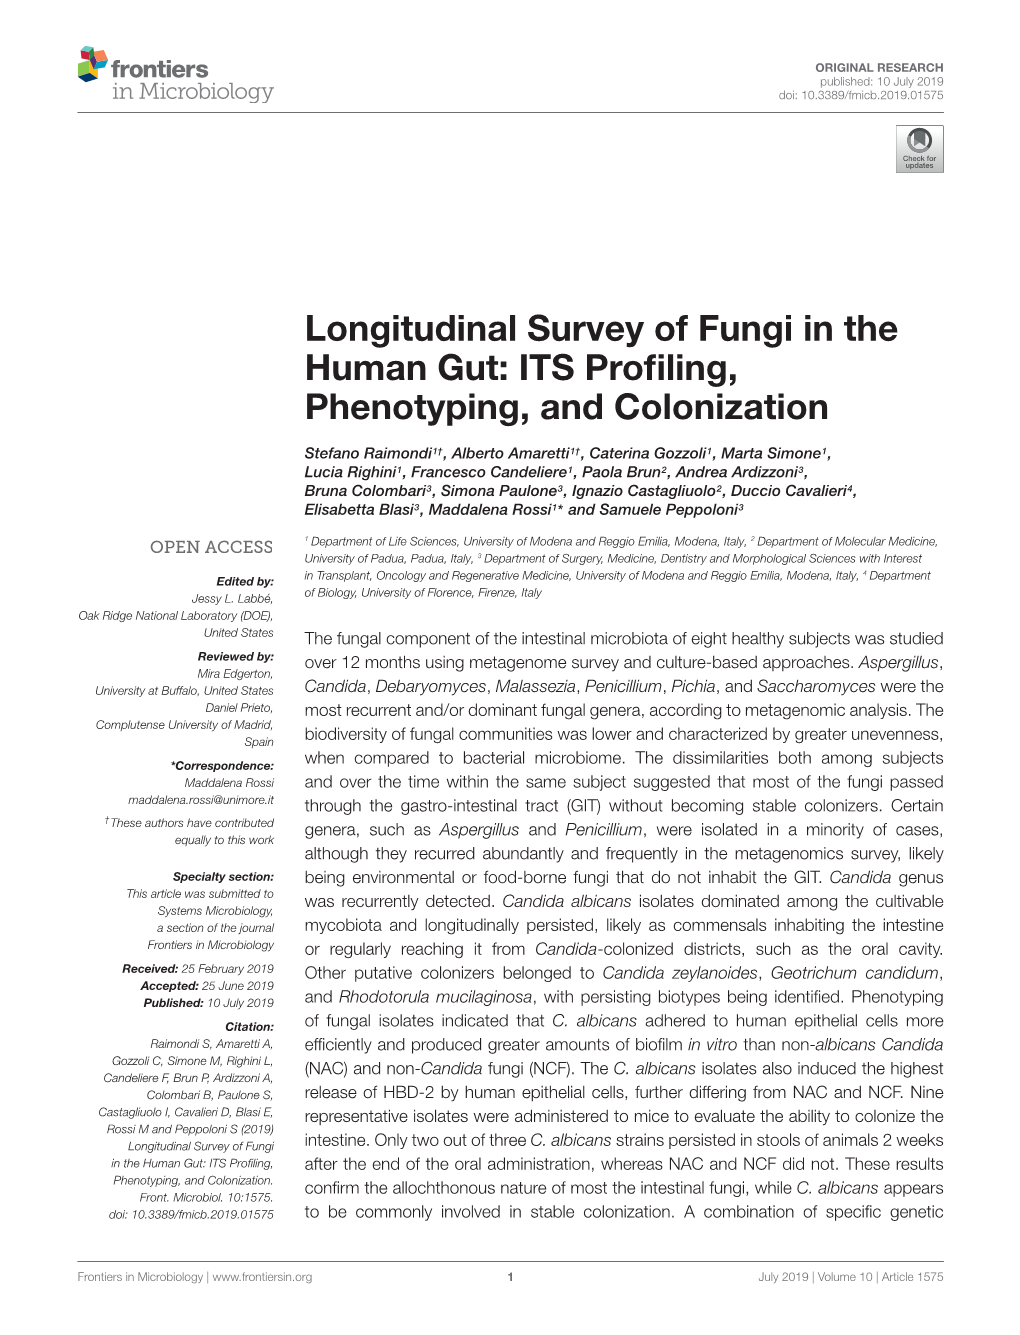 Longitudinal Survey of Fungi in the Human Gut: ITS Profiling, Phenotyping, and Colonization